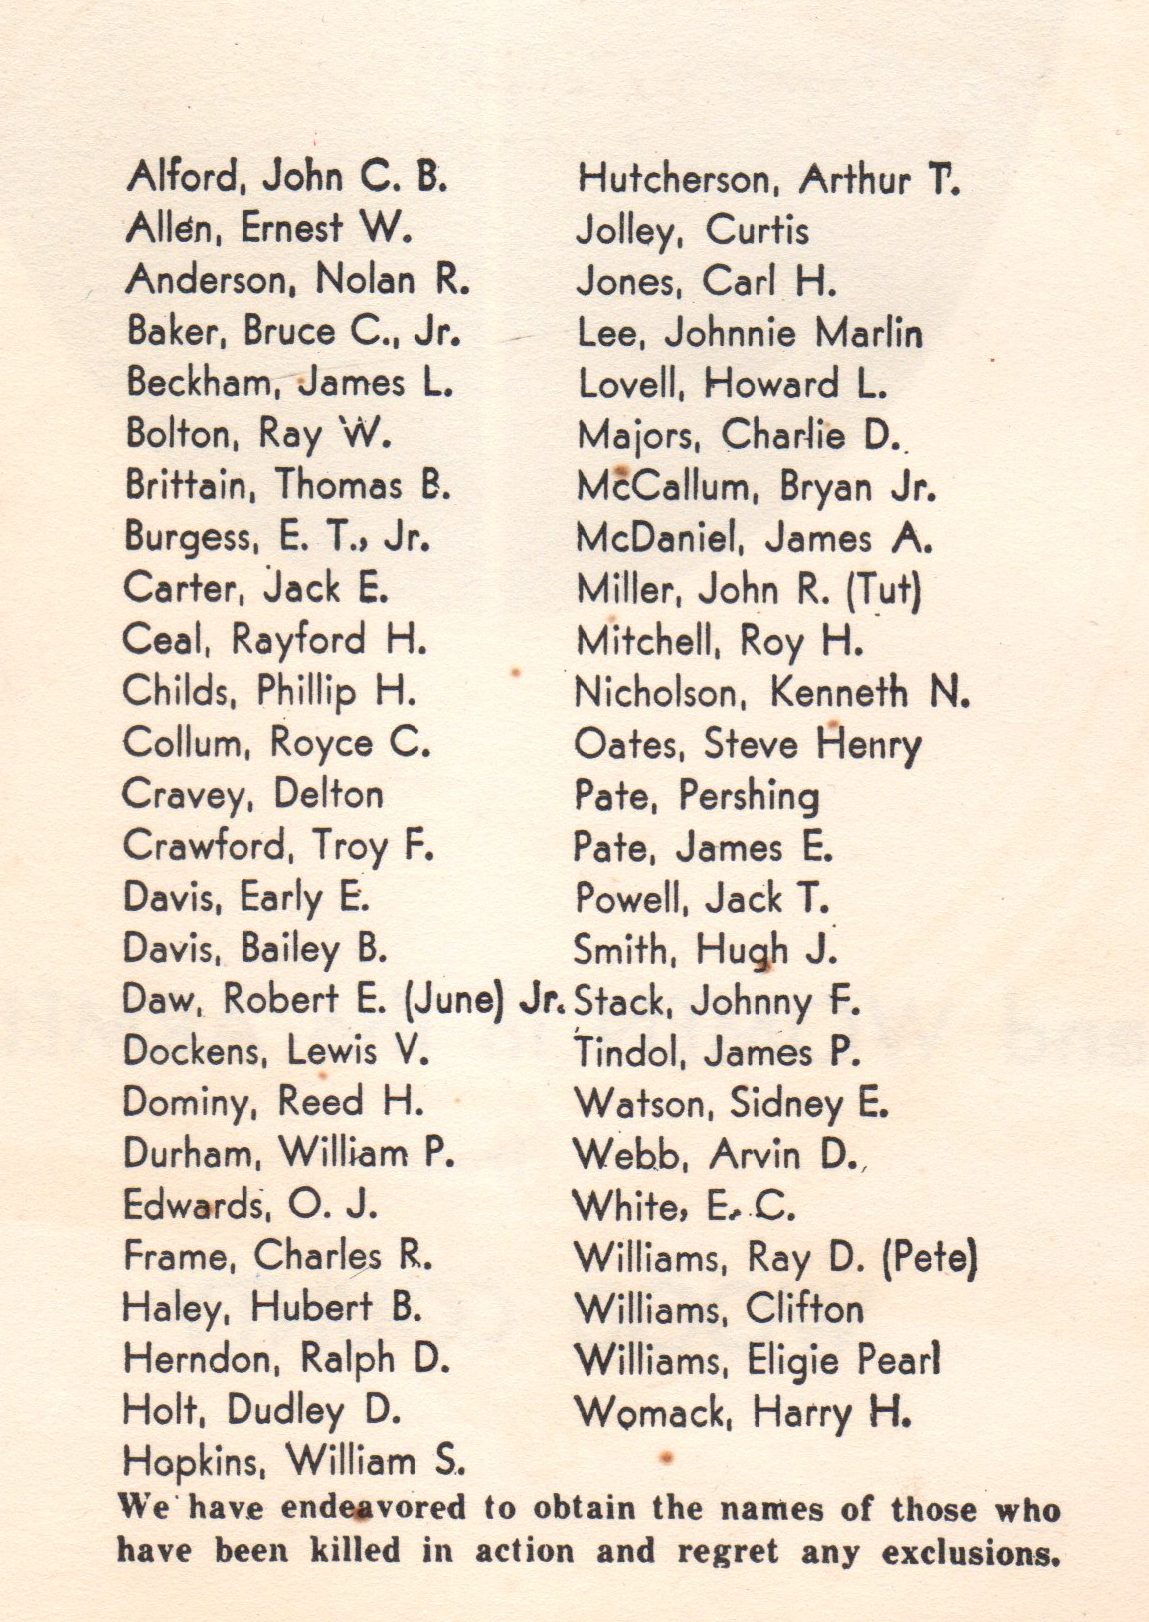 Men and women in the Armed Forces from Woods County Texas Killed in Action